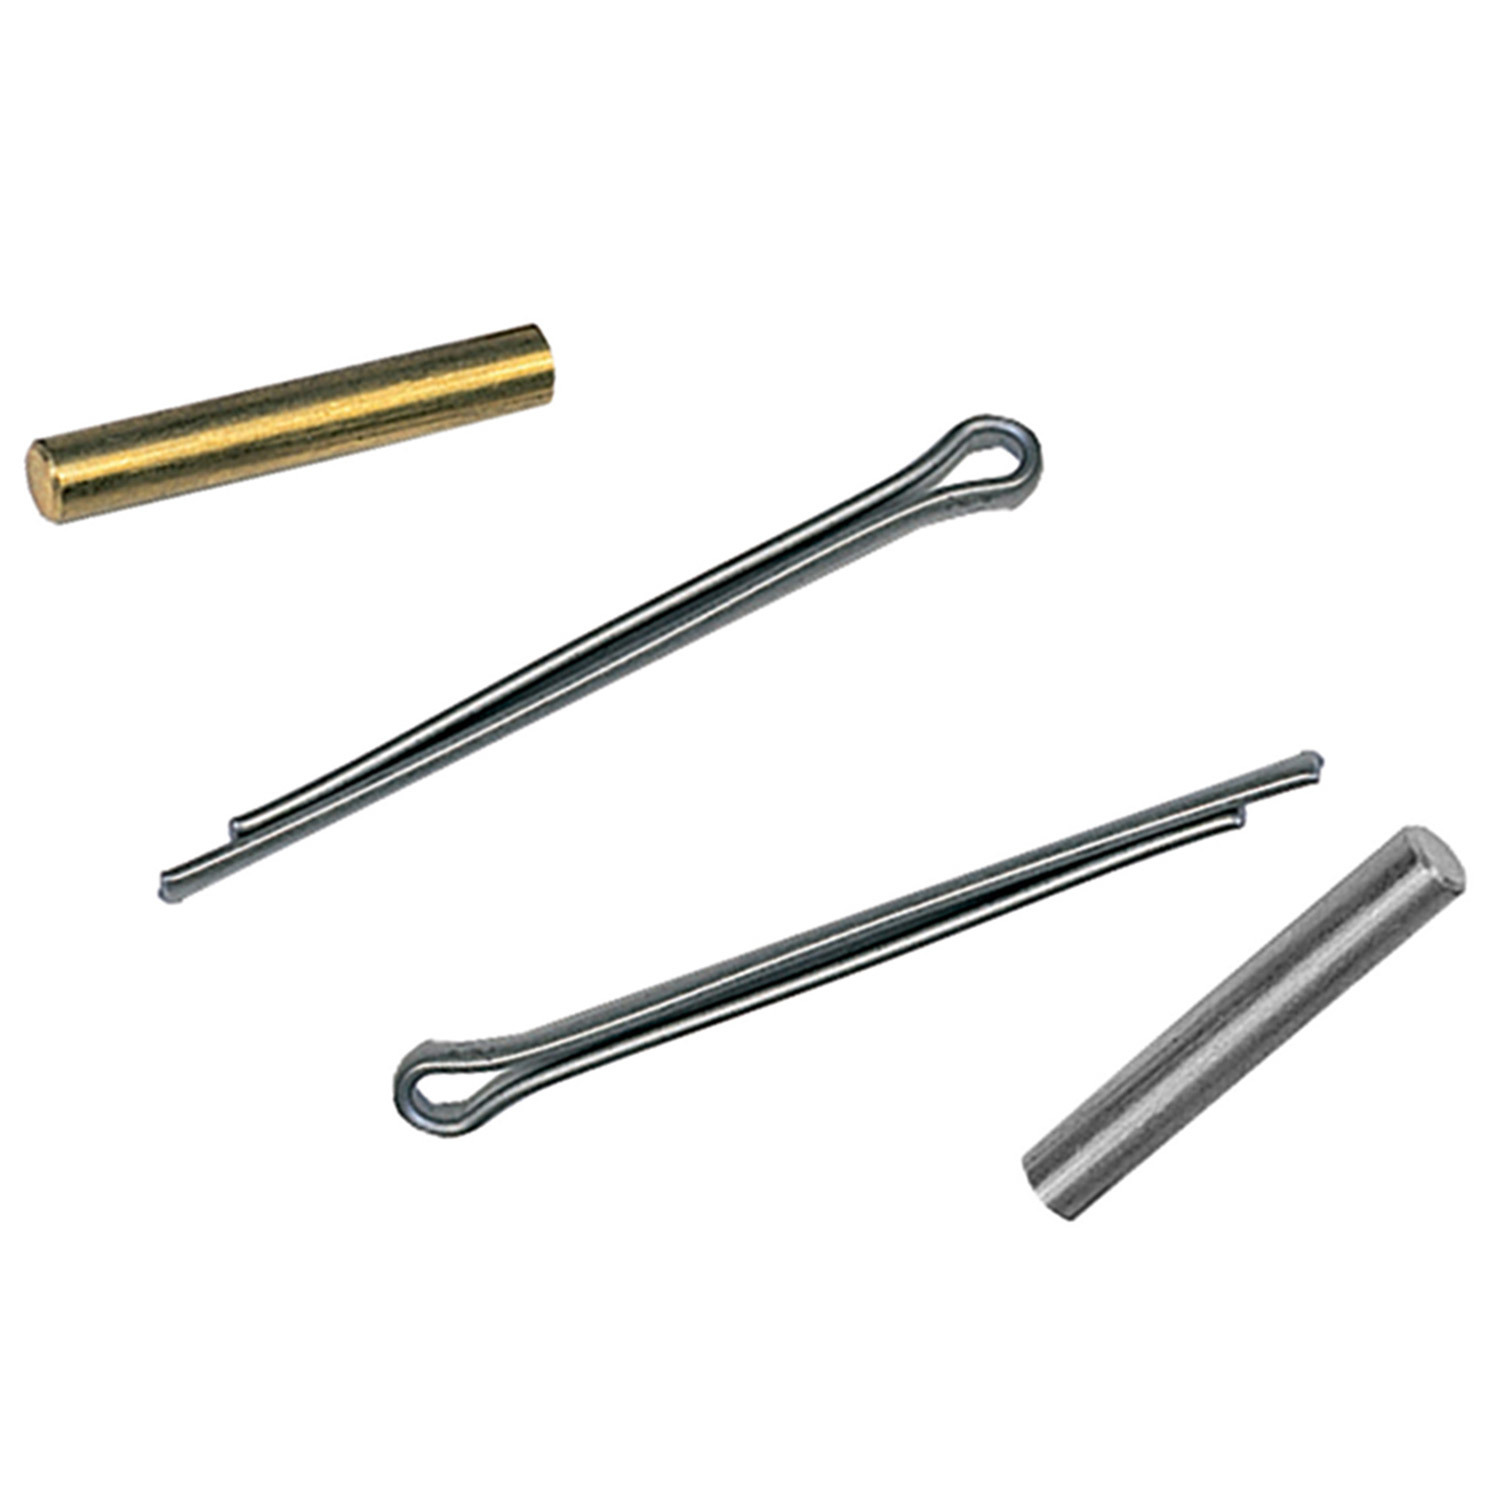 Stainless Steel Mount Pins, Boat Davit parts